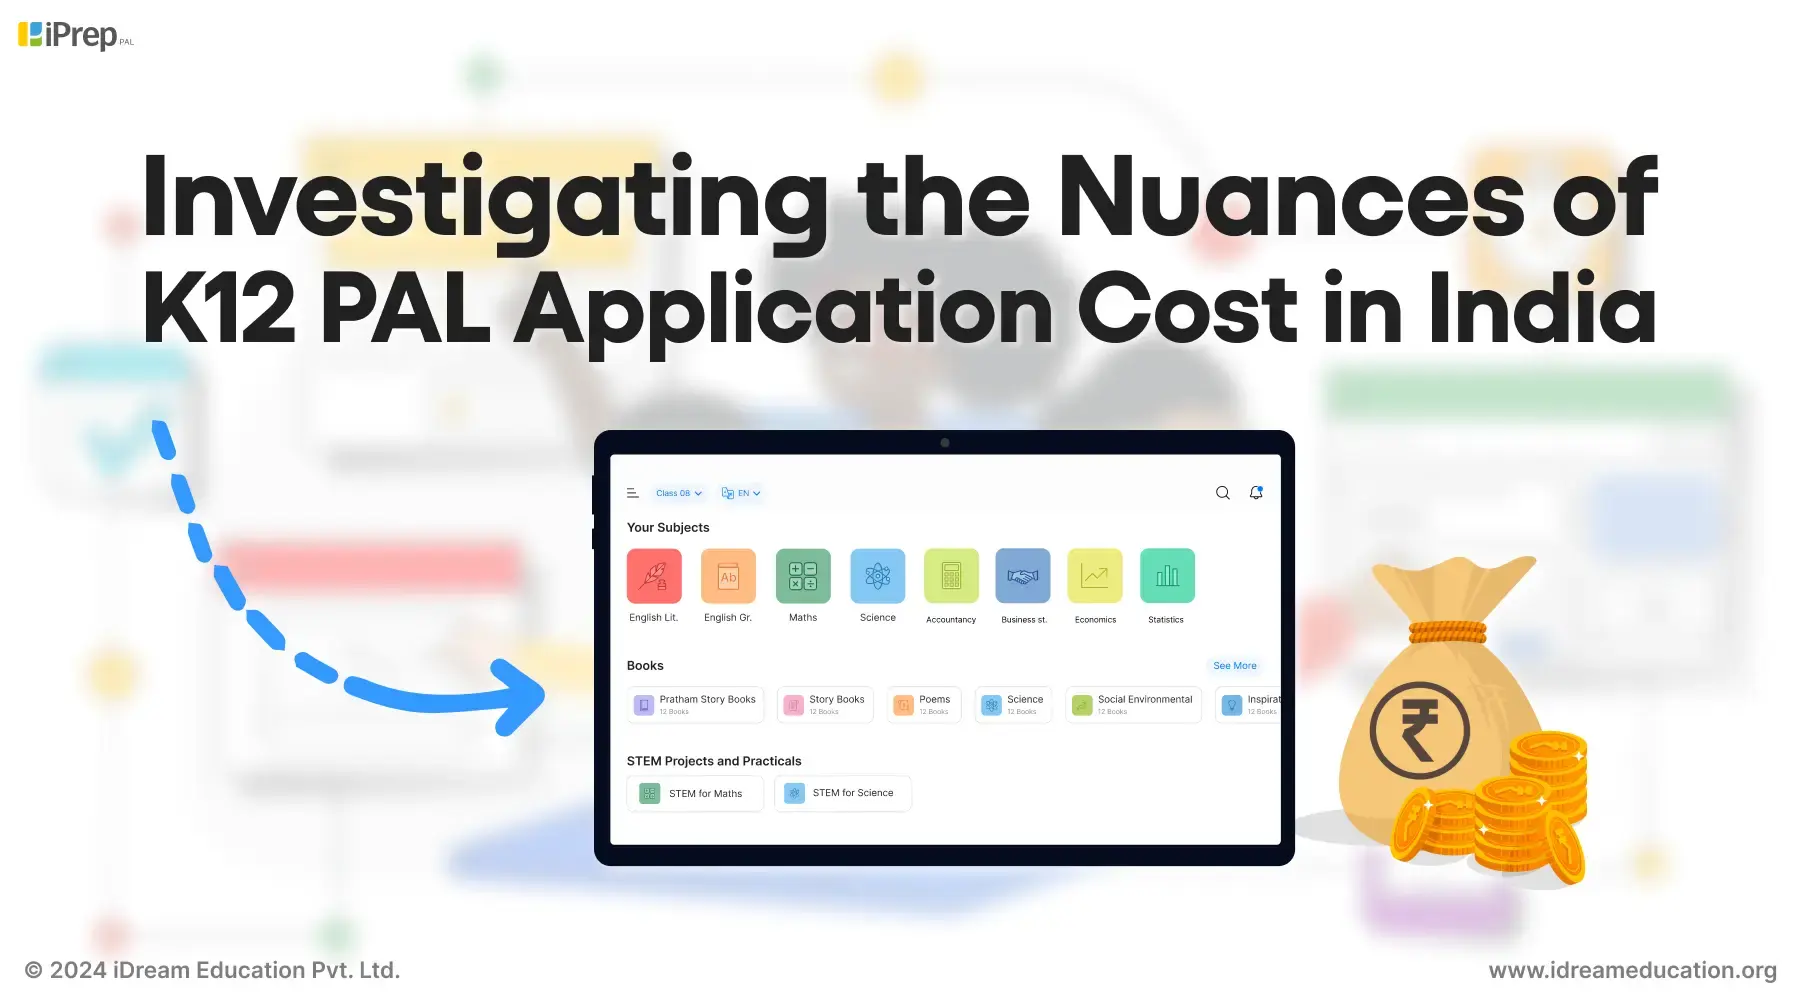 A visual representation of the nuances of K12 pal application cost in India